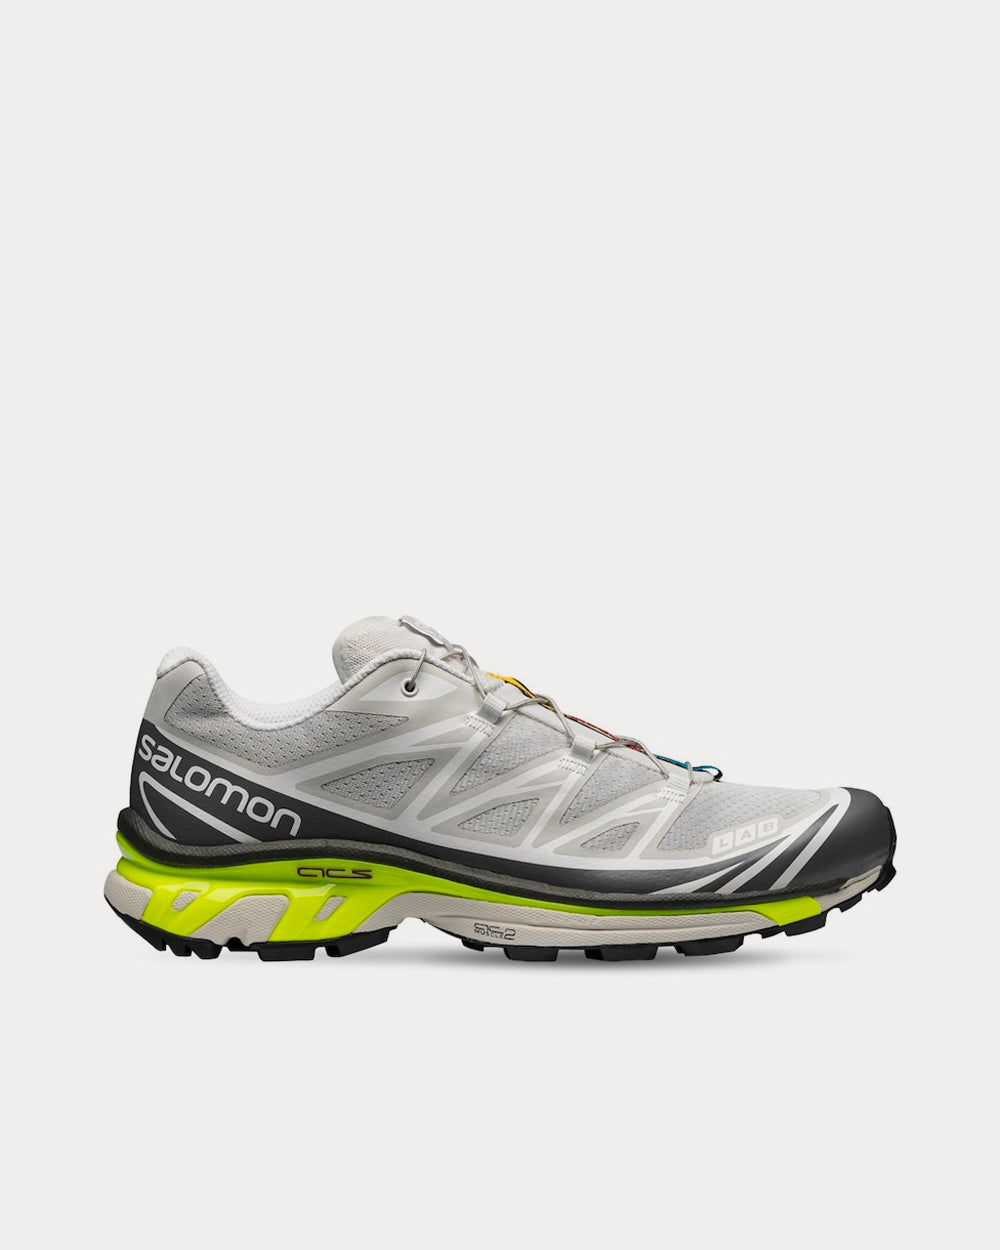 XT-6 Advanced Lunar Rock / Quiet Shade / Safety Yellow Low Top Sneakers